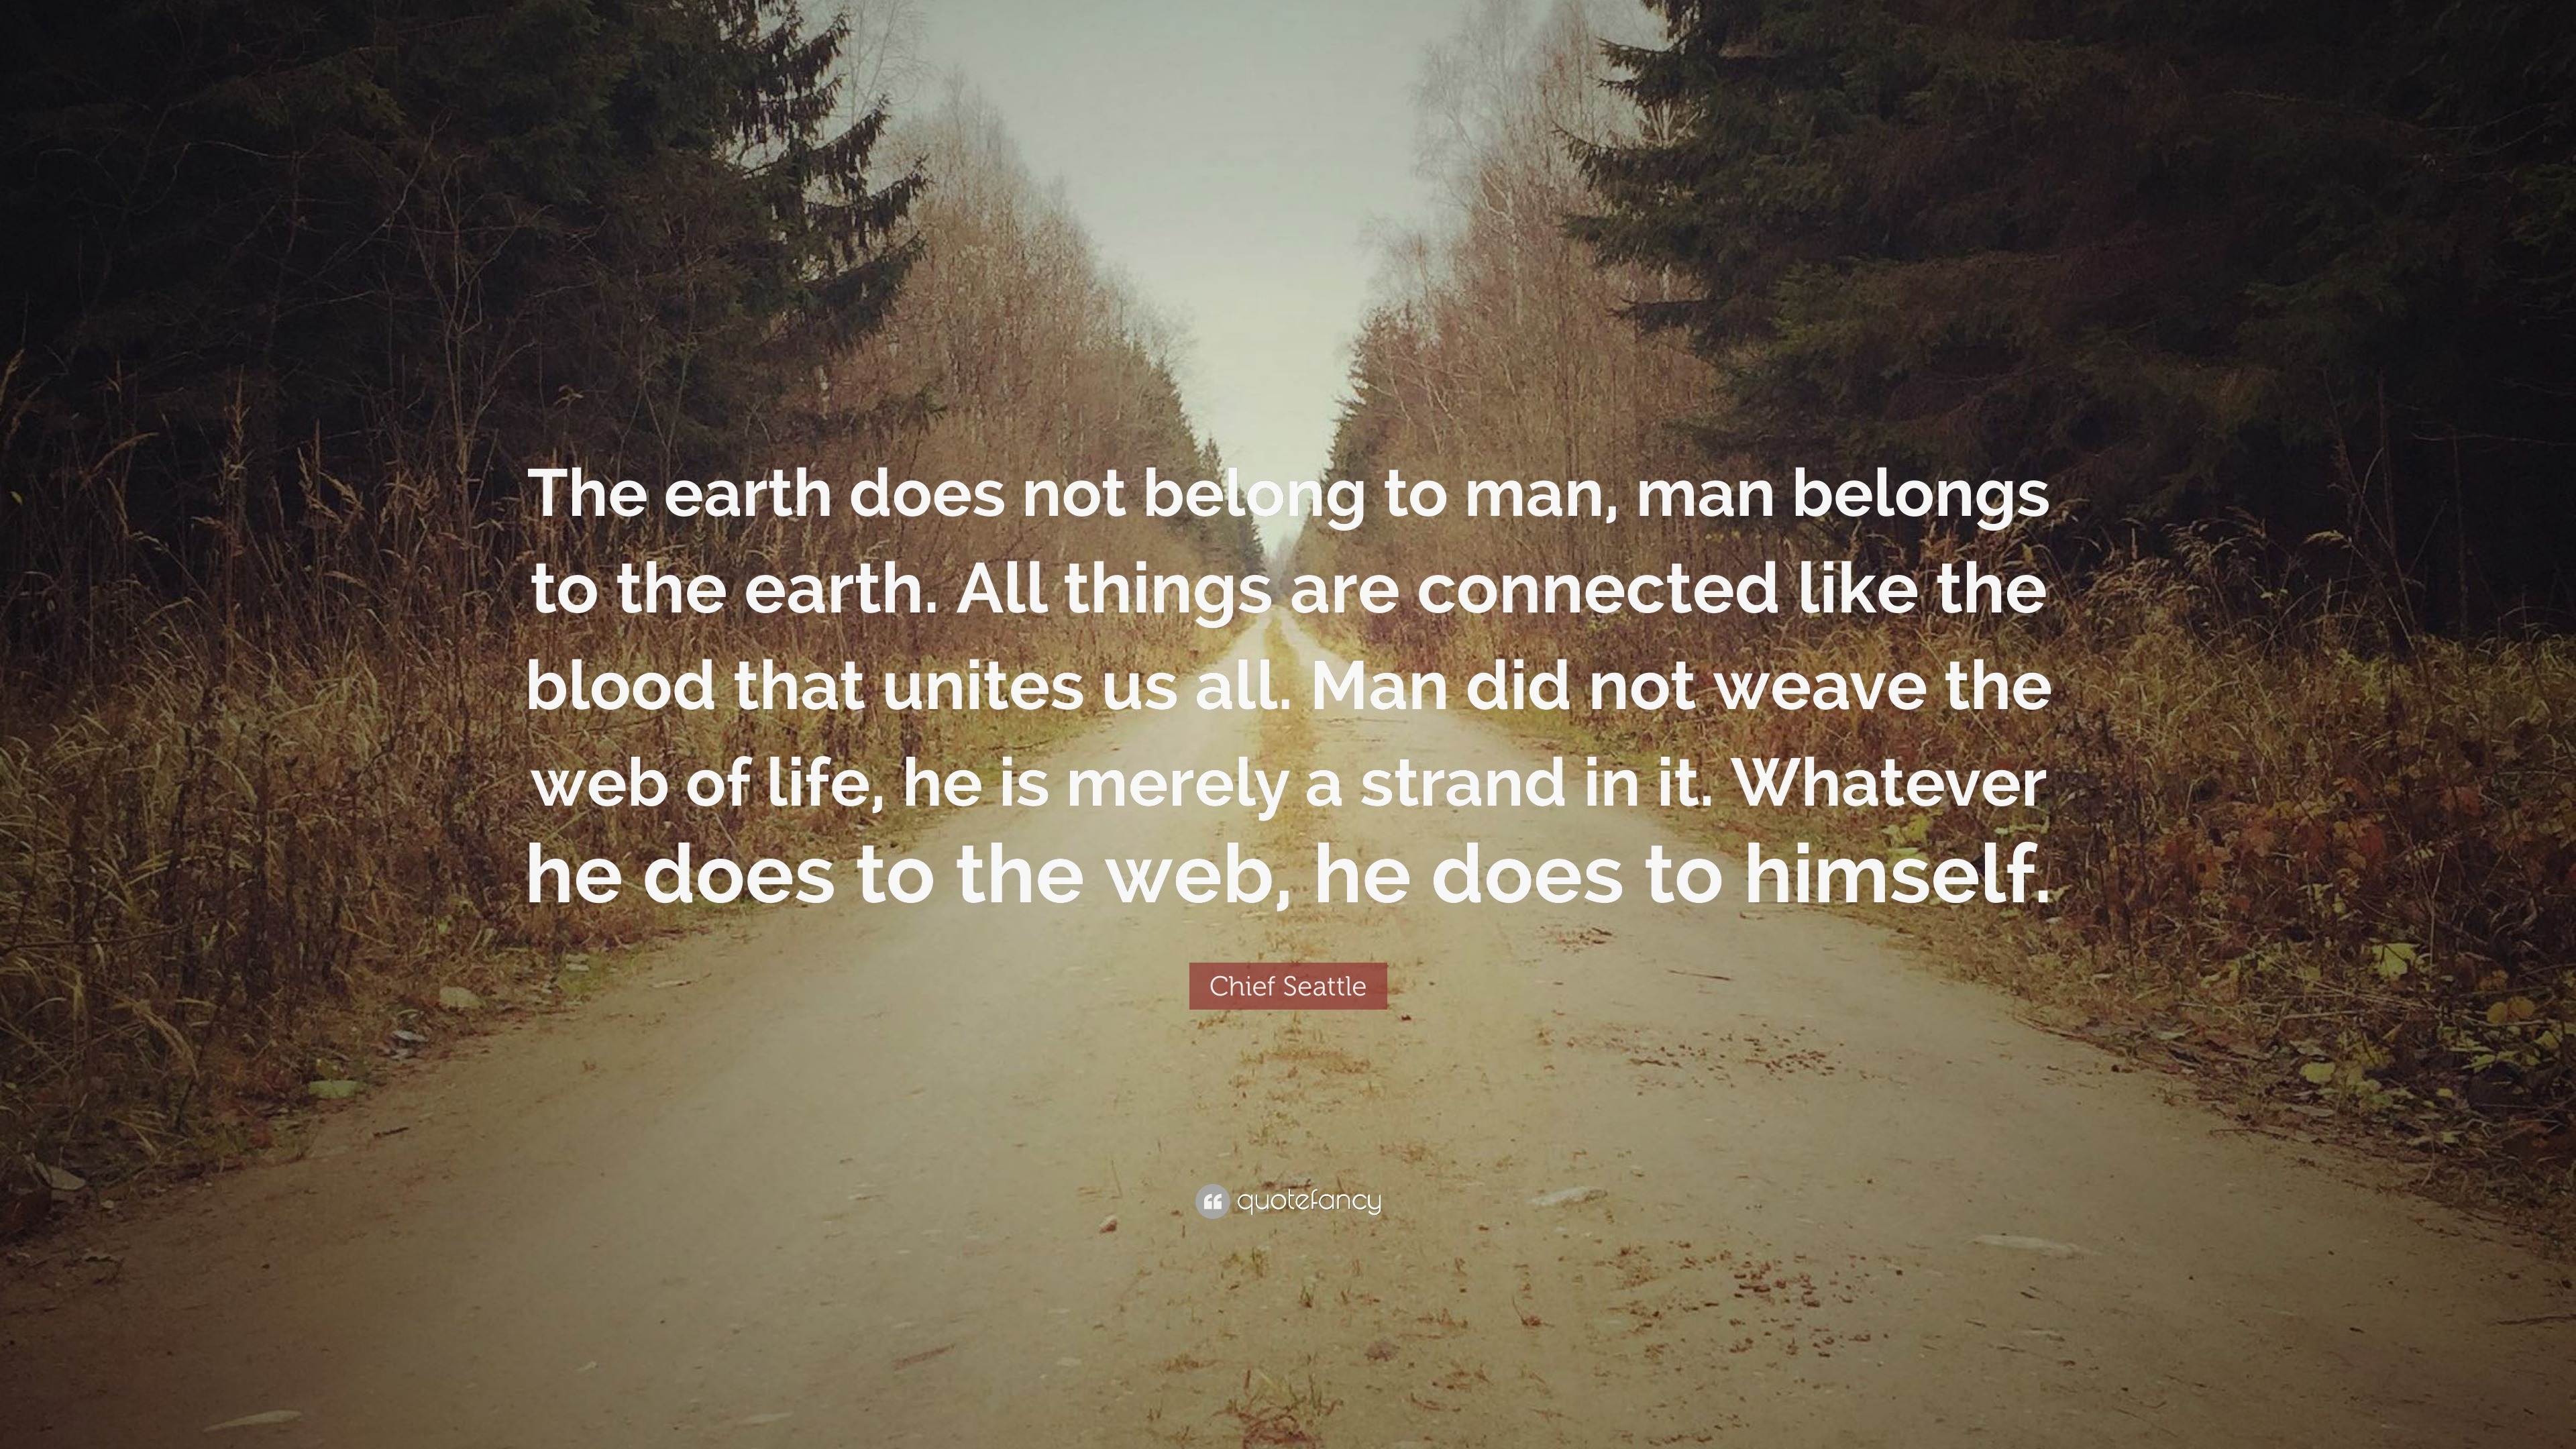 1087789 Chief Seattle Quote The earth does not belong to man man belongs